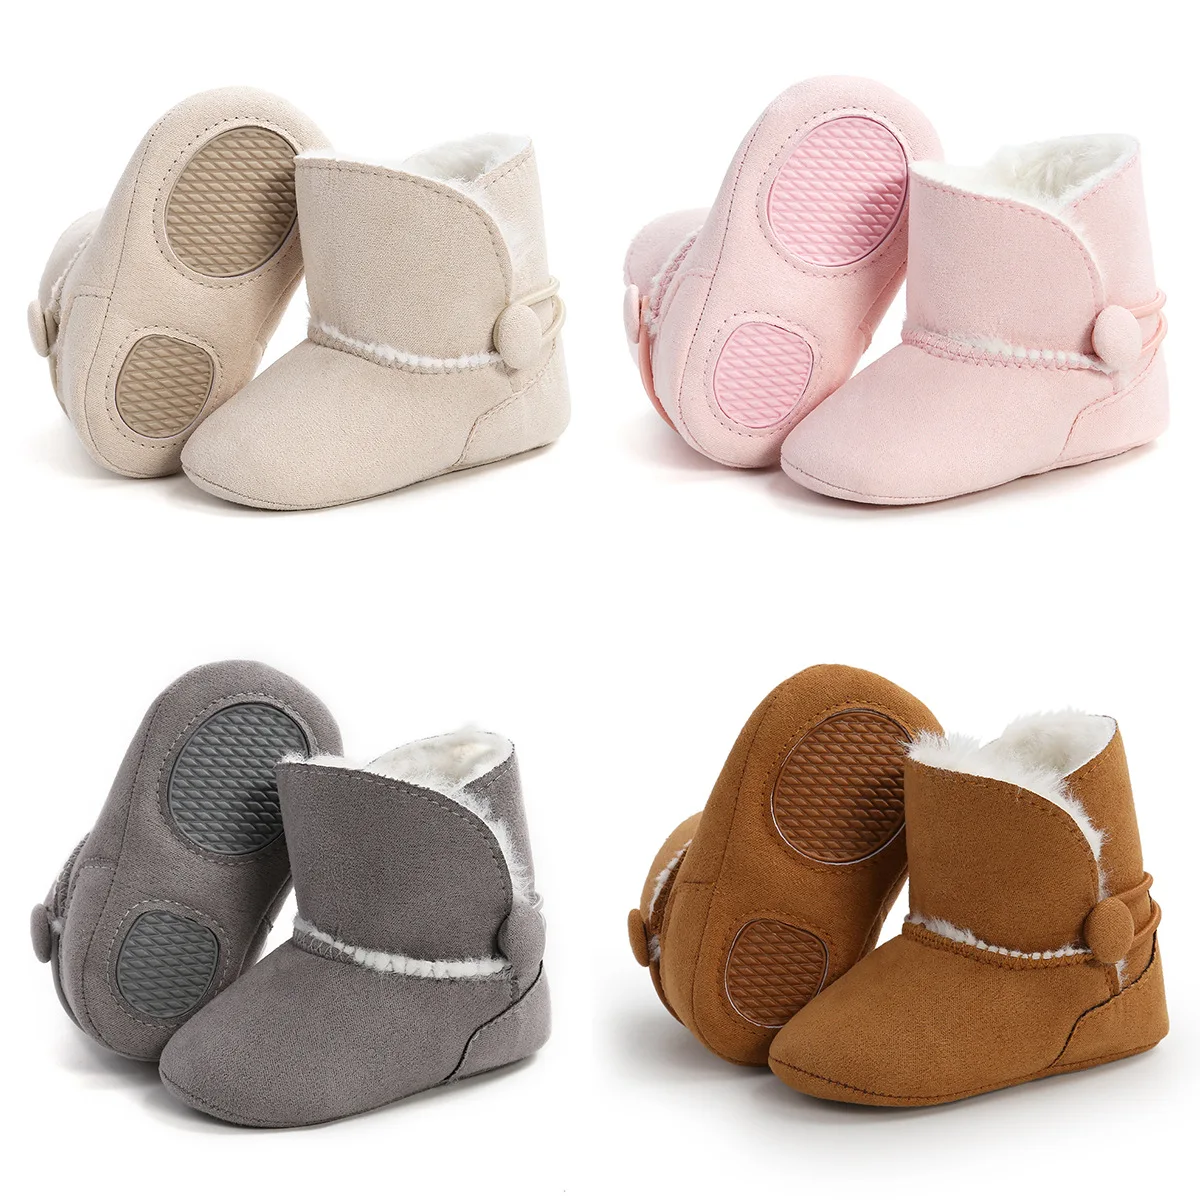 

6248 Winter Boots Baby Shoes Boy Girl Sneakers Warm Soft Bottom Anti Slip Newborn Shoes Toddler Infant First Walkers